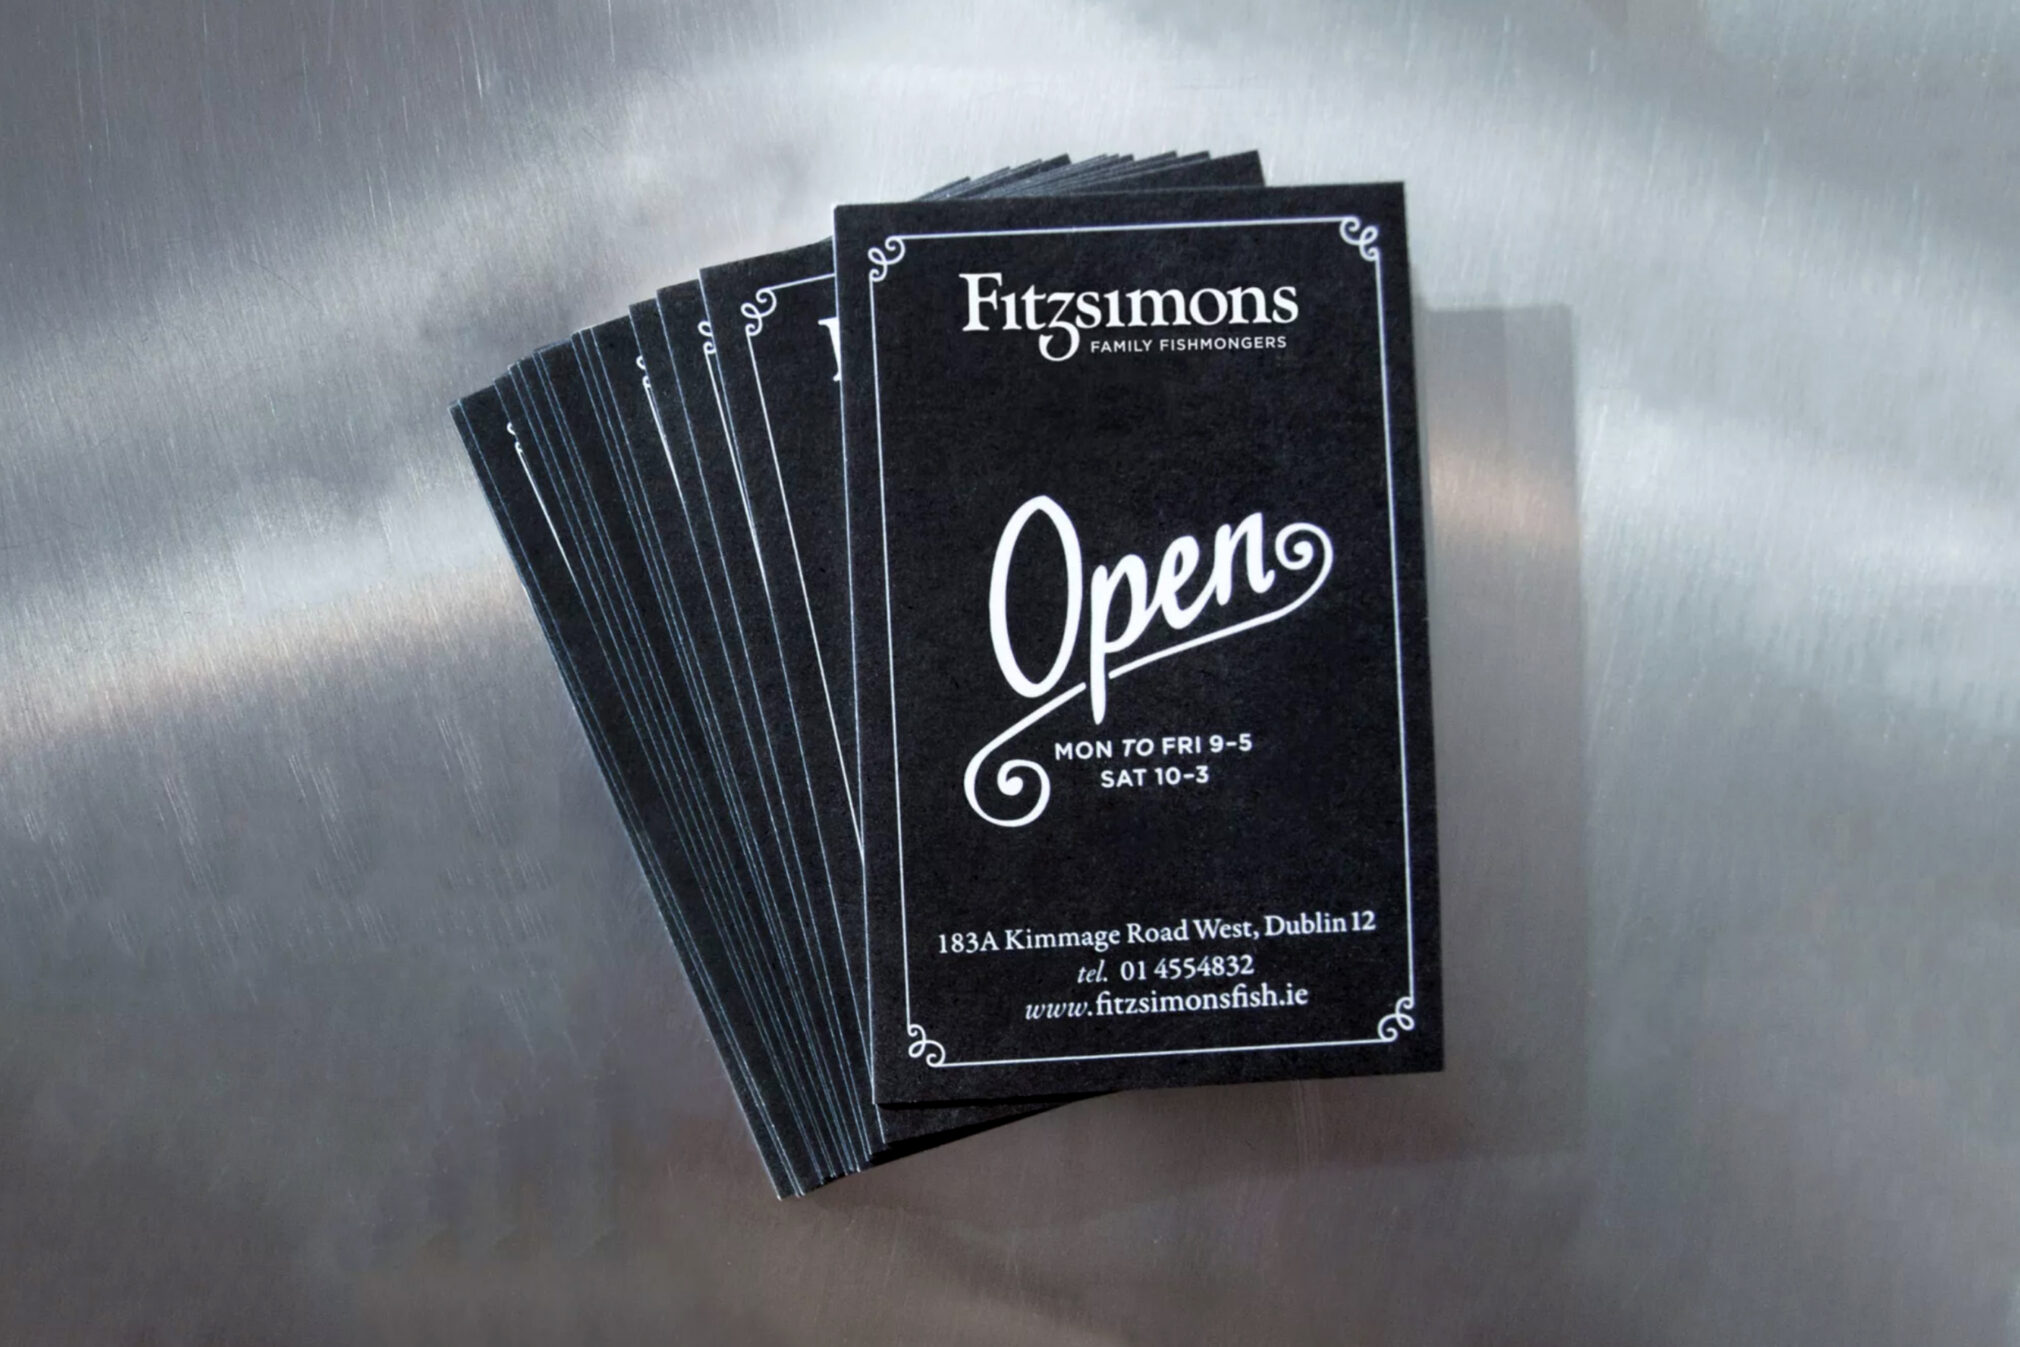 Fitzsimmons business cards